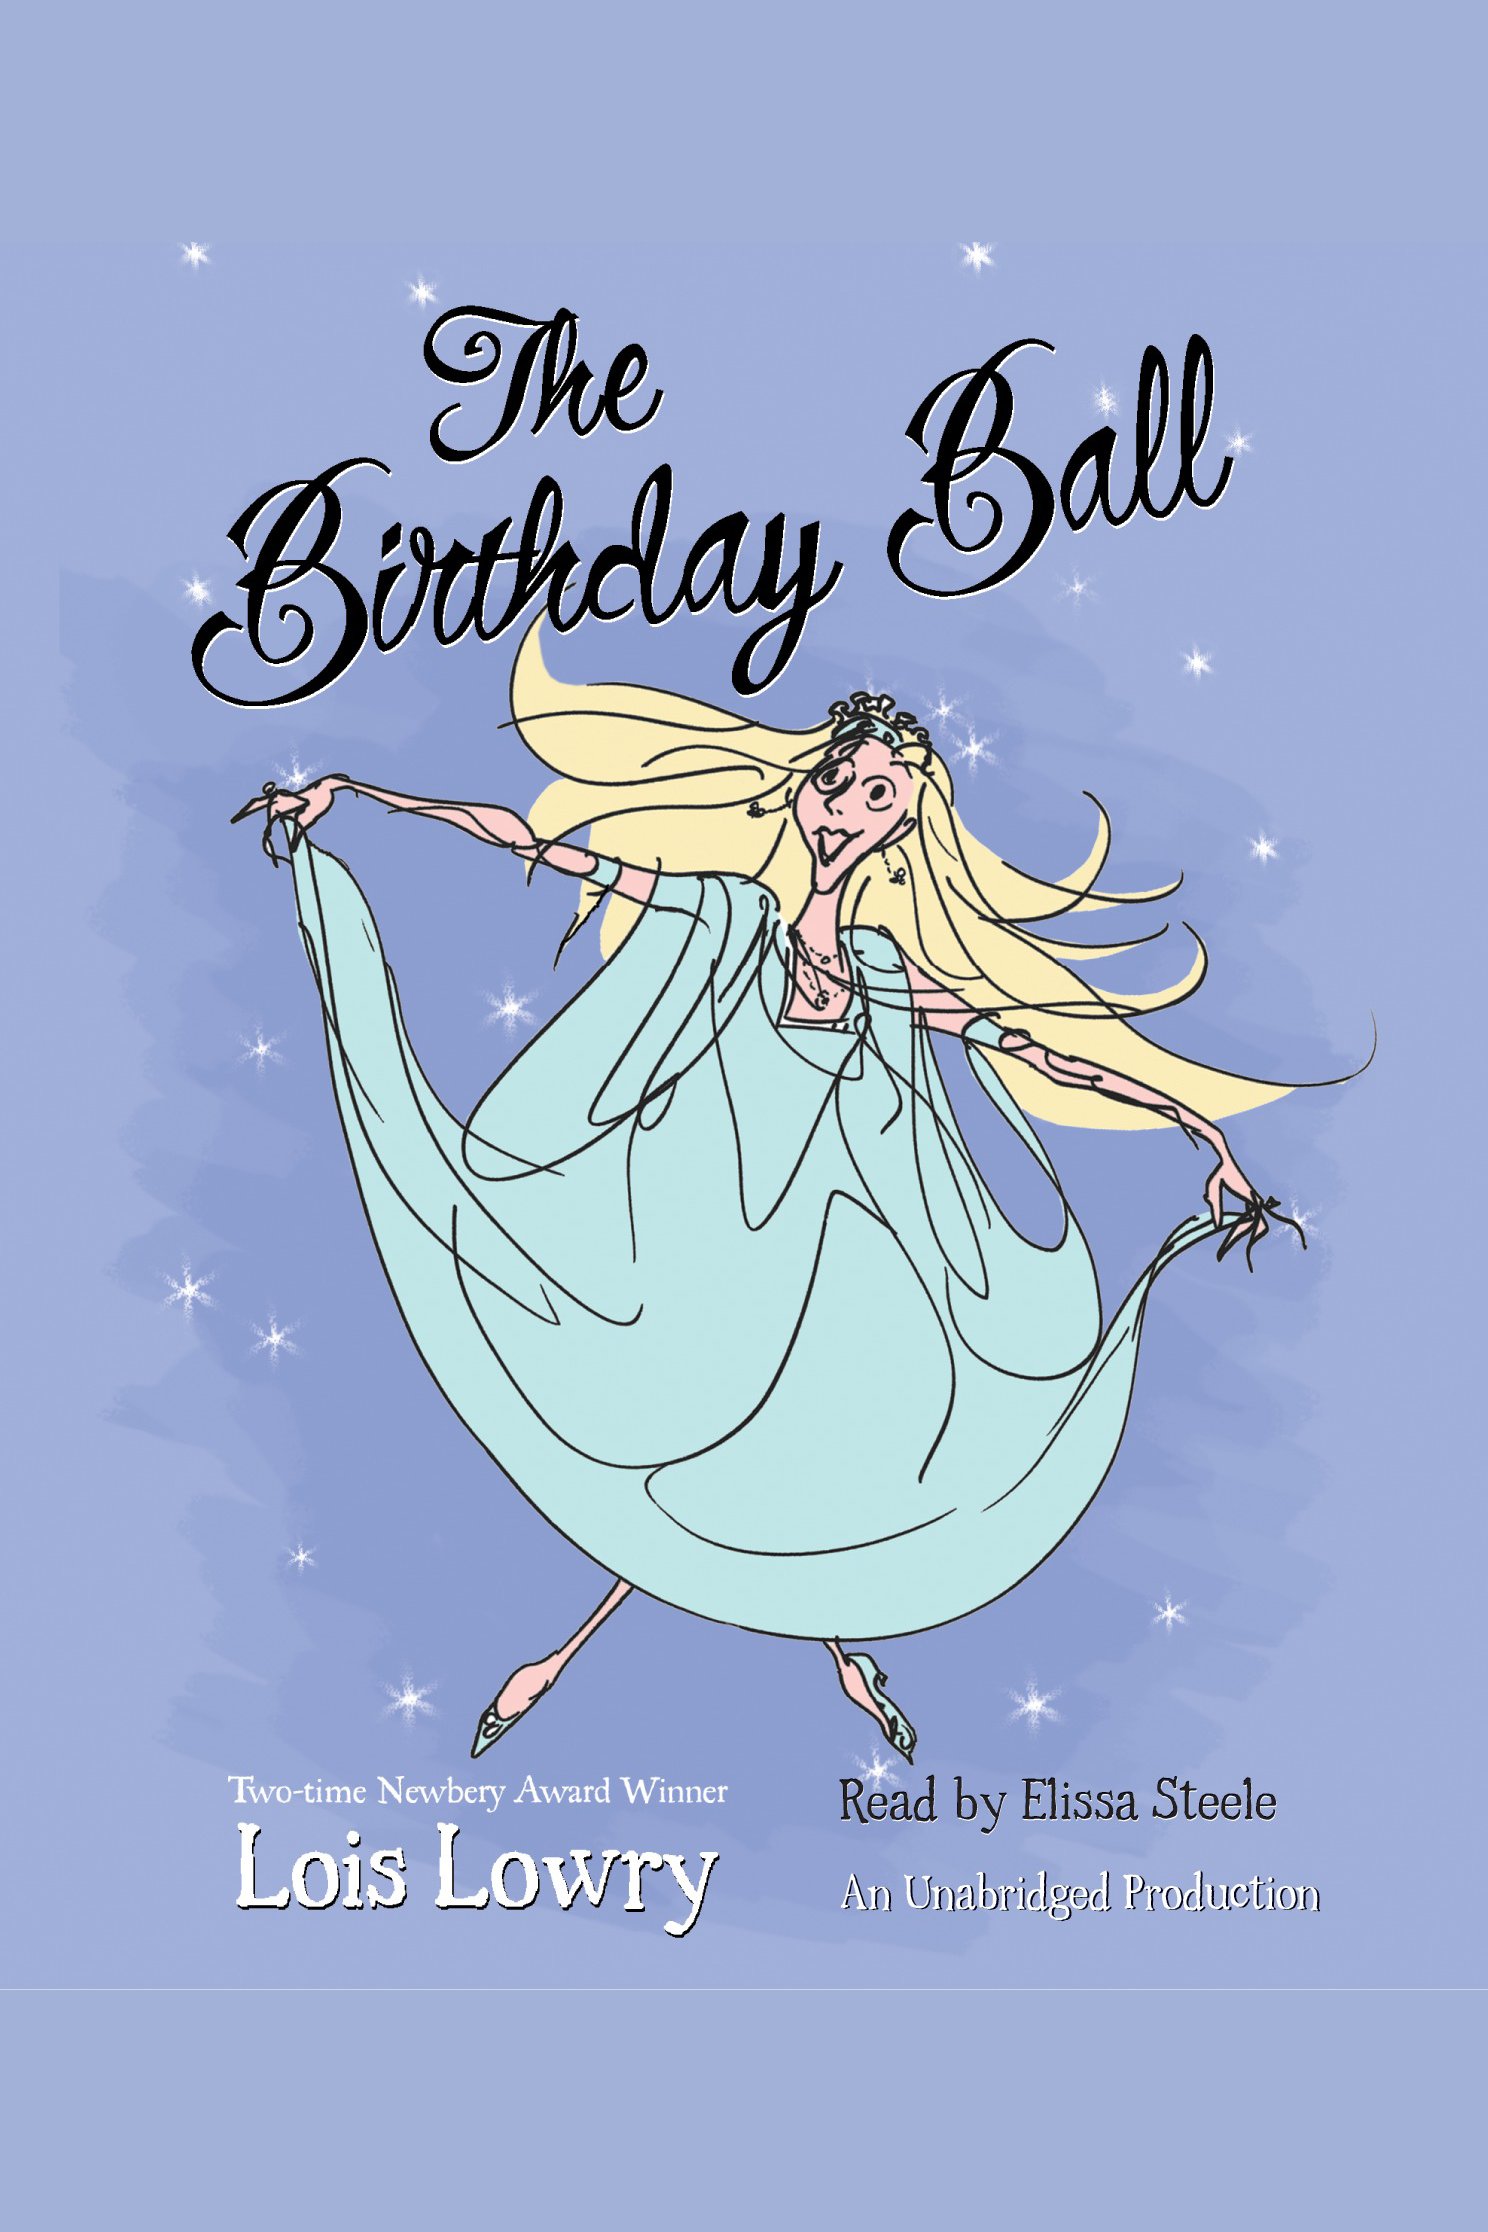 The birthday ball cover image